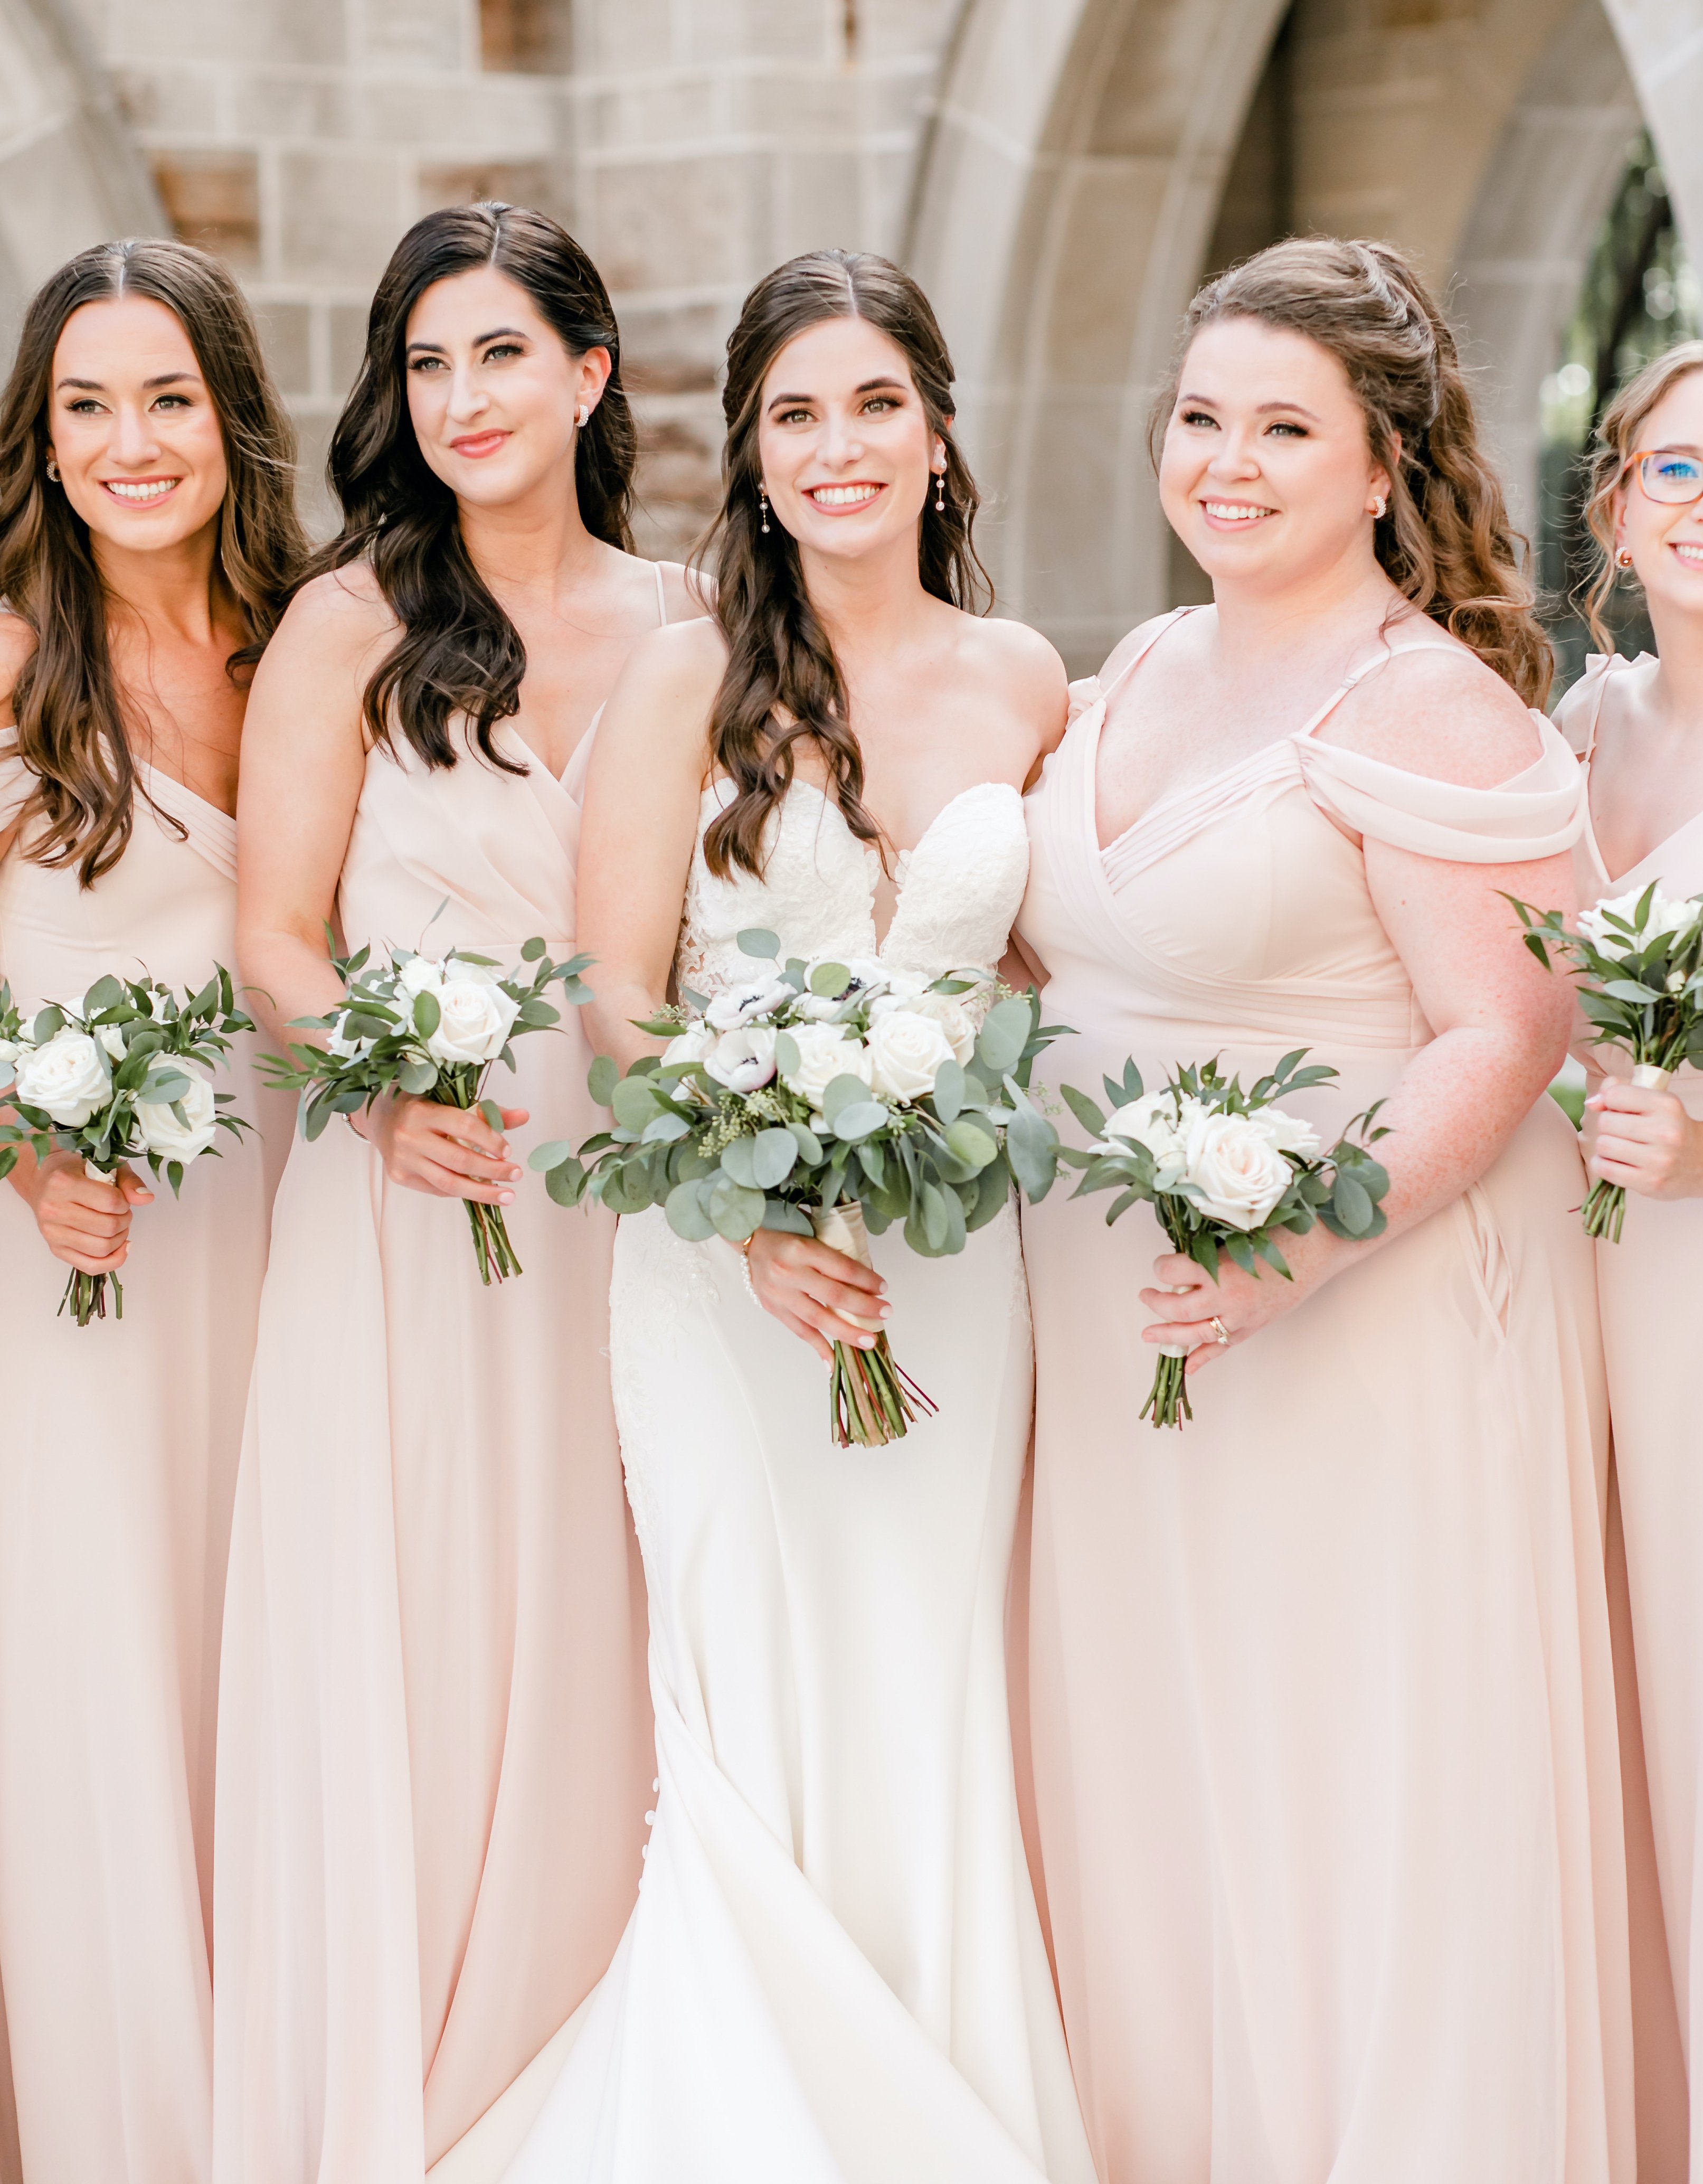 A bride stands in the middle of her bridesmaids who are wearing blush dresses.